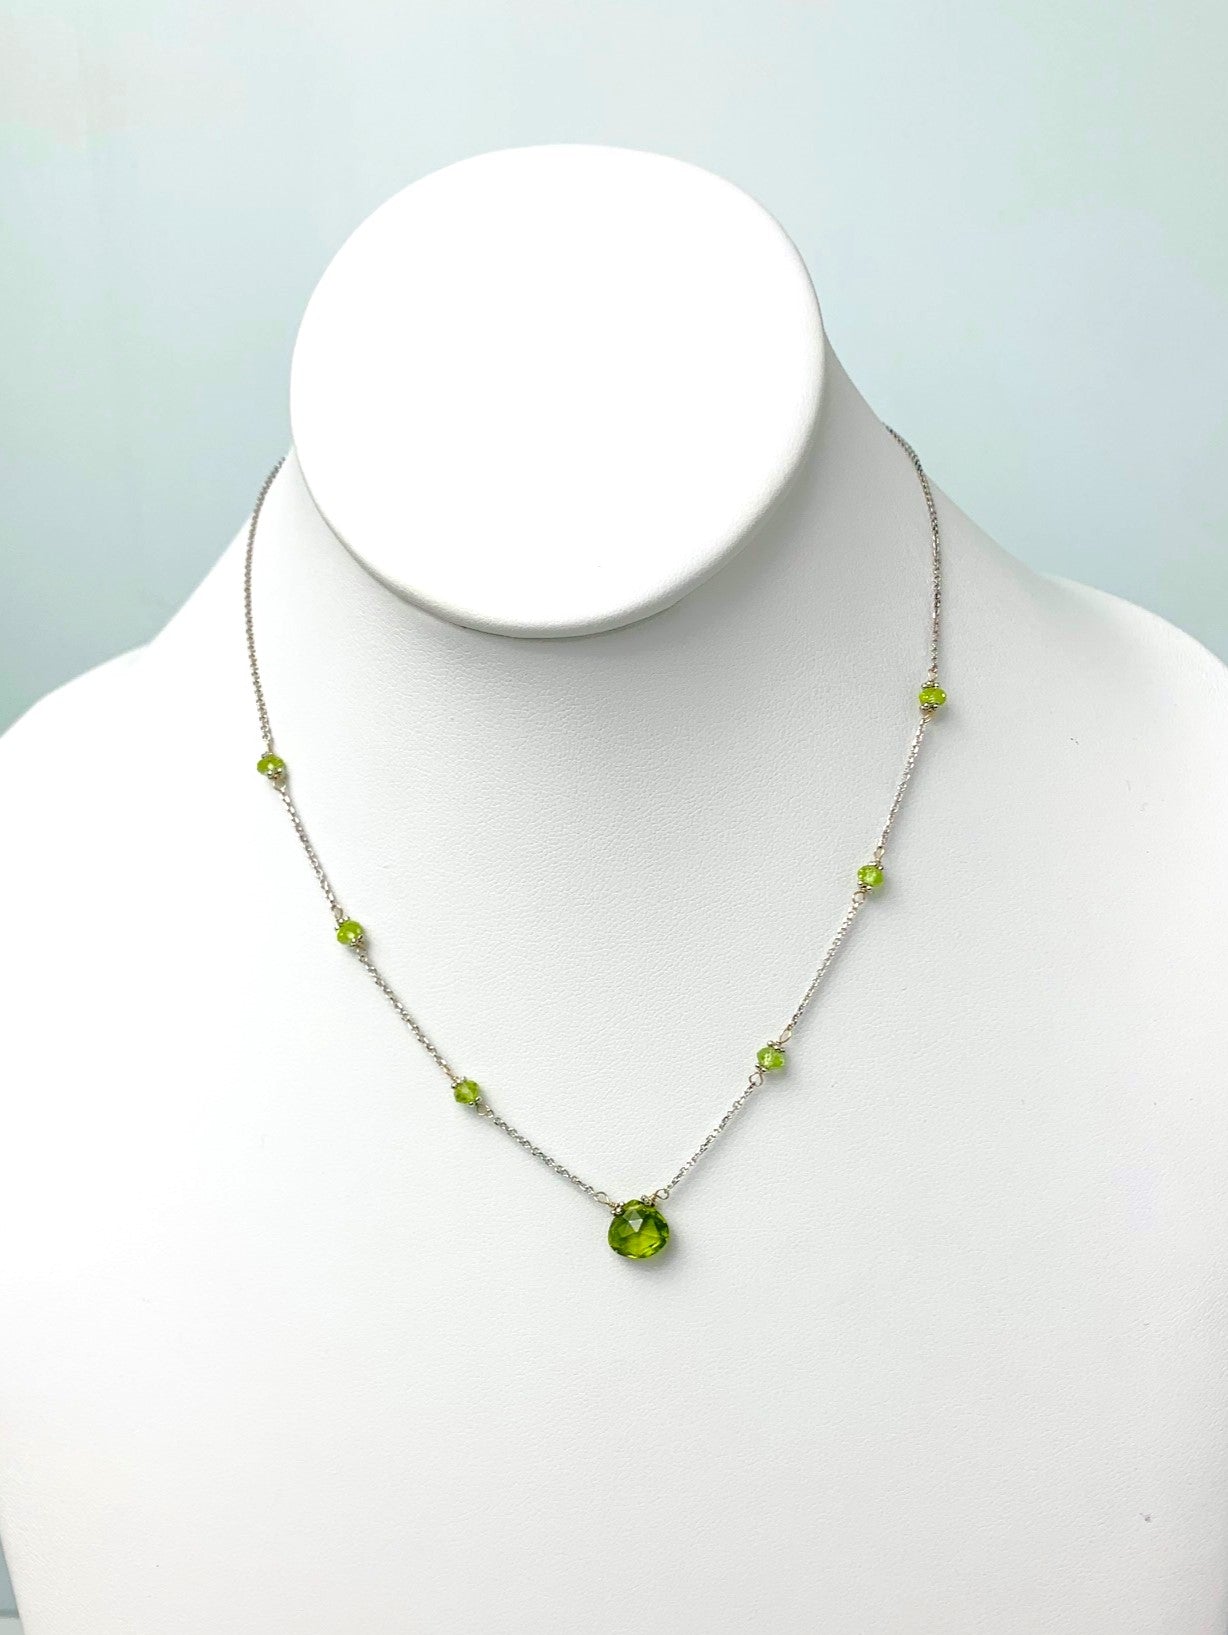 16"-17" Peridot Station Necklace With Center Drop in 14KW - NCK-445-DRPGM14W-PDT-17